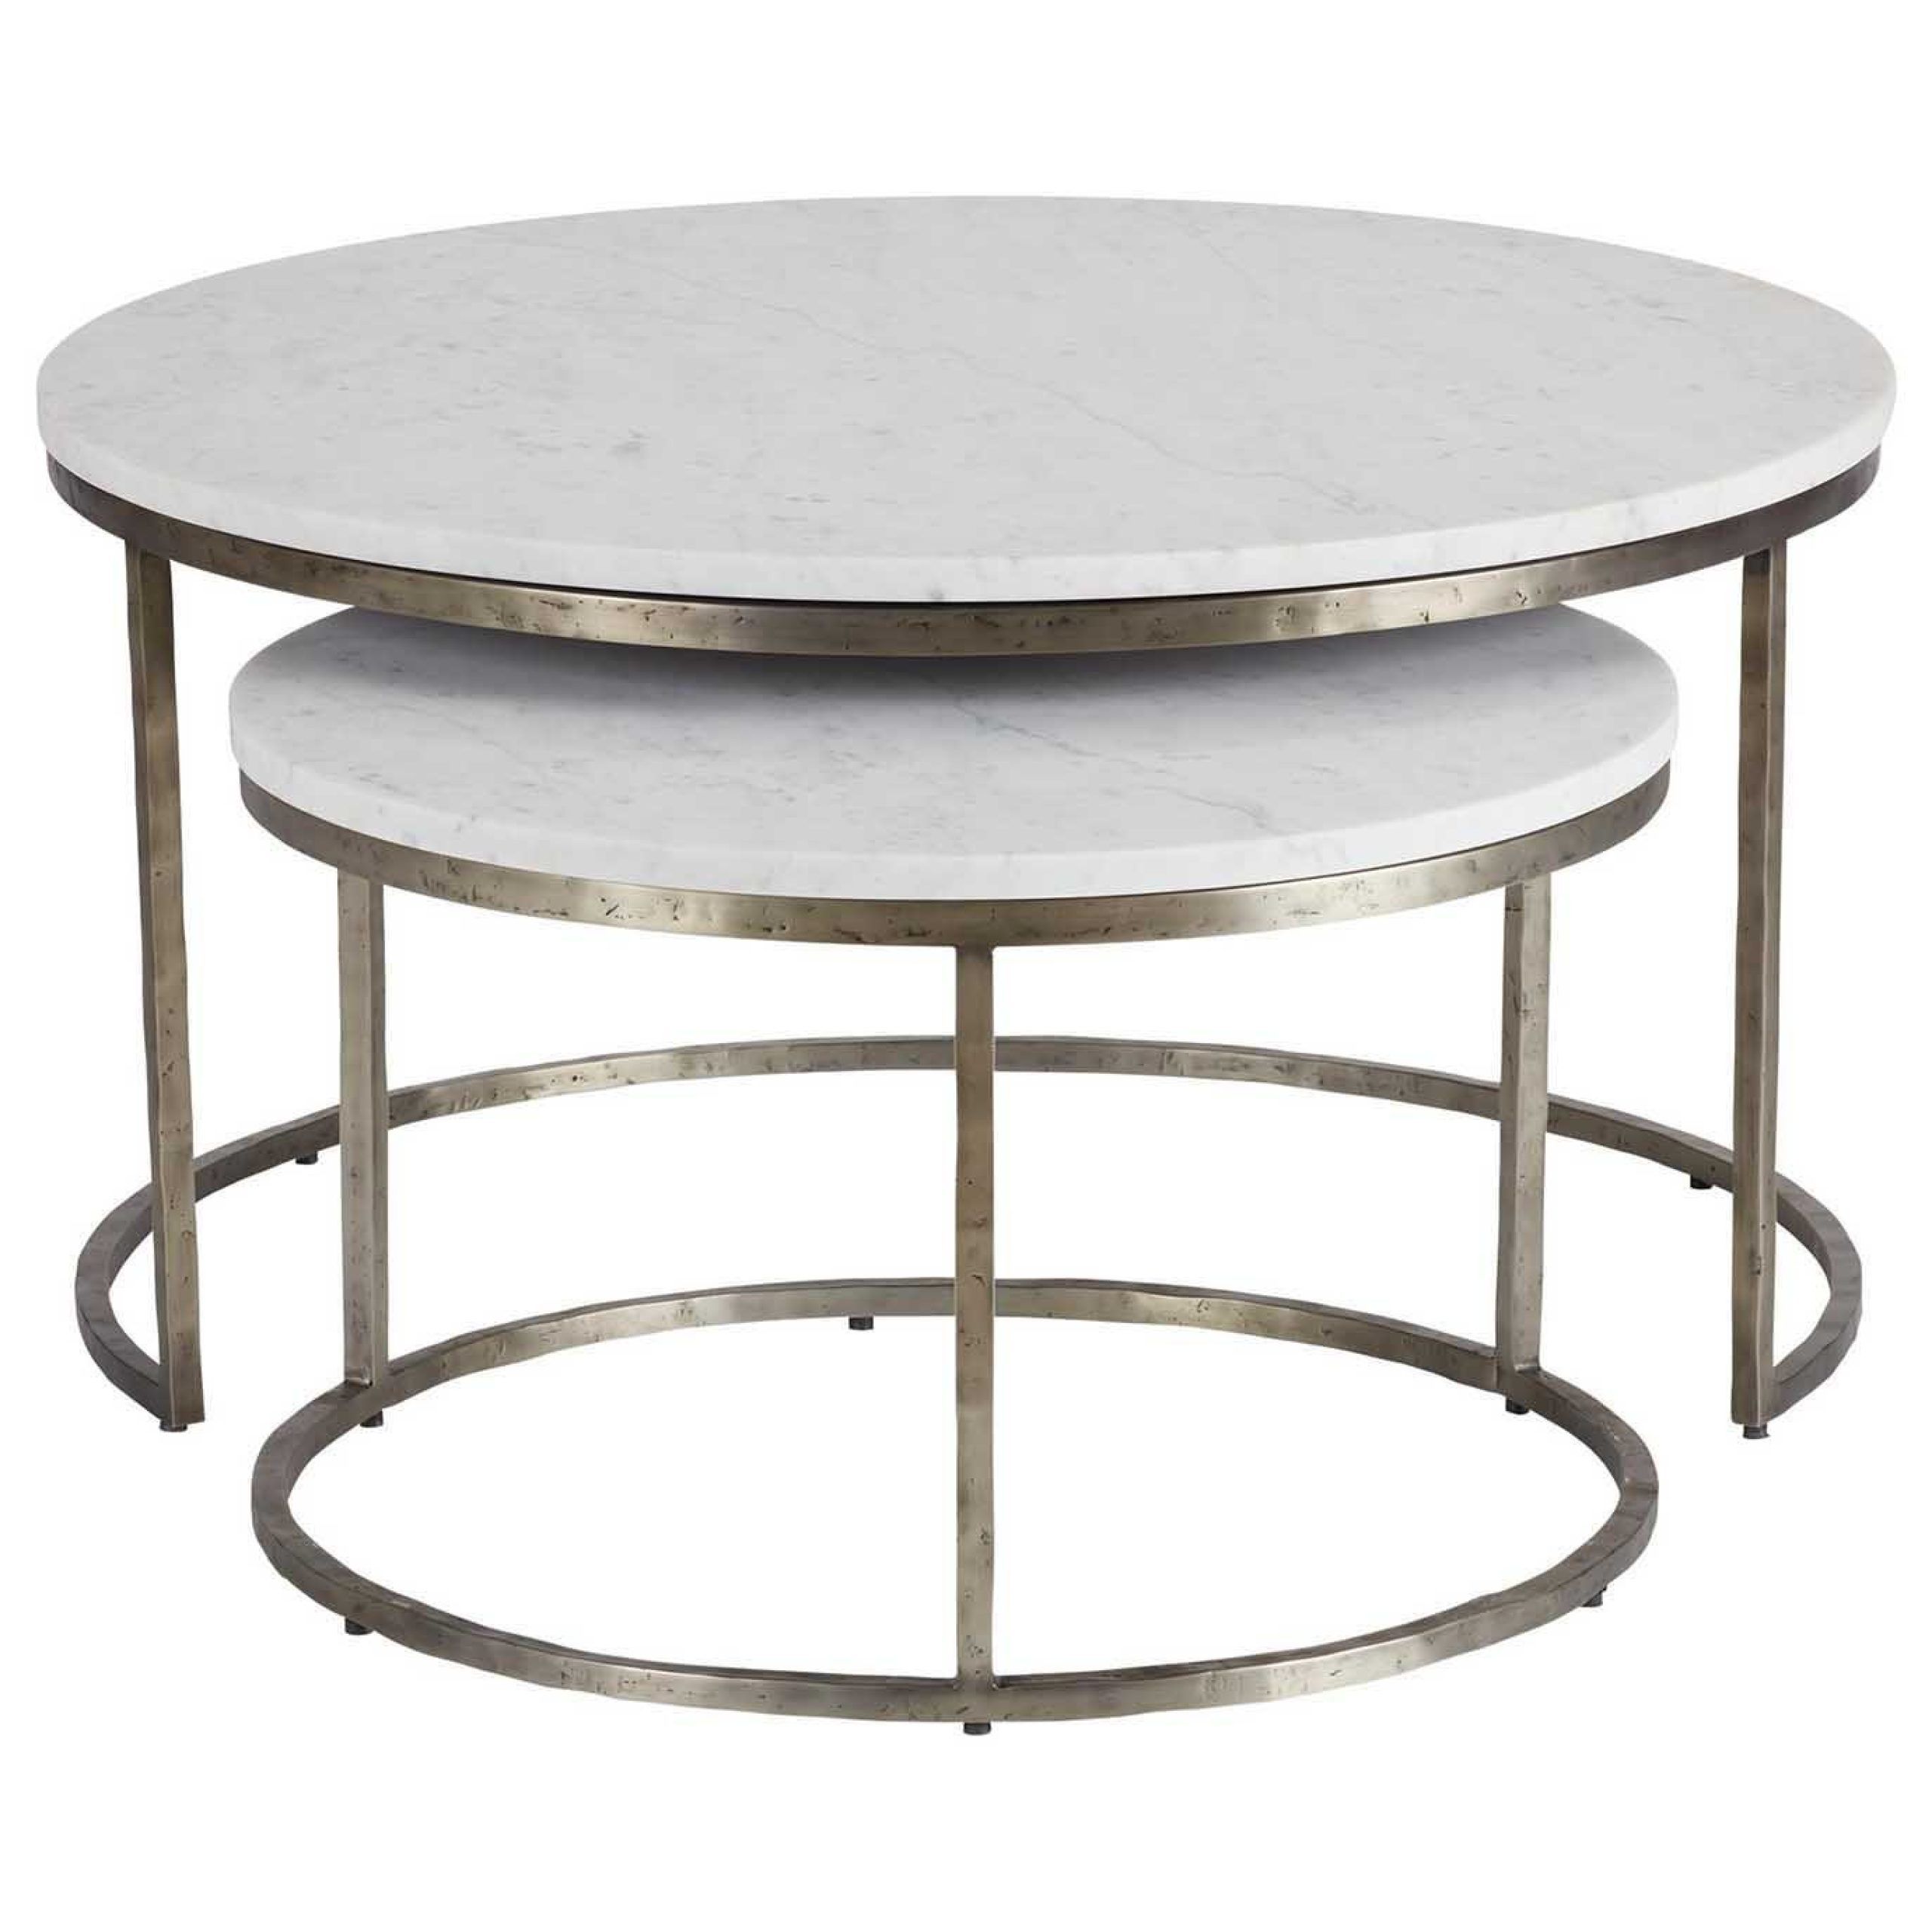 Bayliss Marble Top Coffee Table | Nesting Table | Ethan Allen Within Nesting Coffee Tables (View 10 of 15)